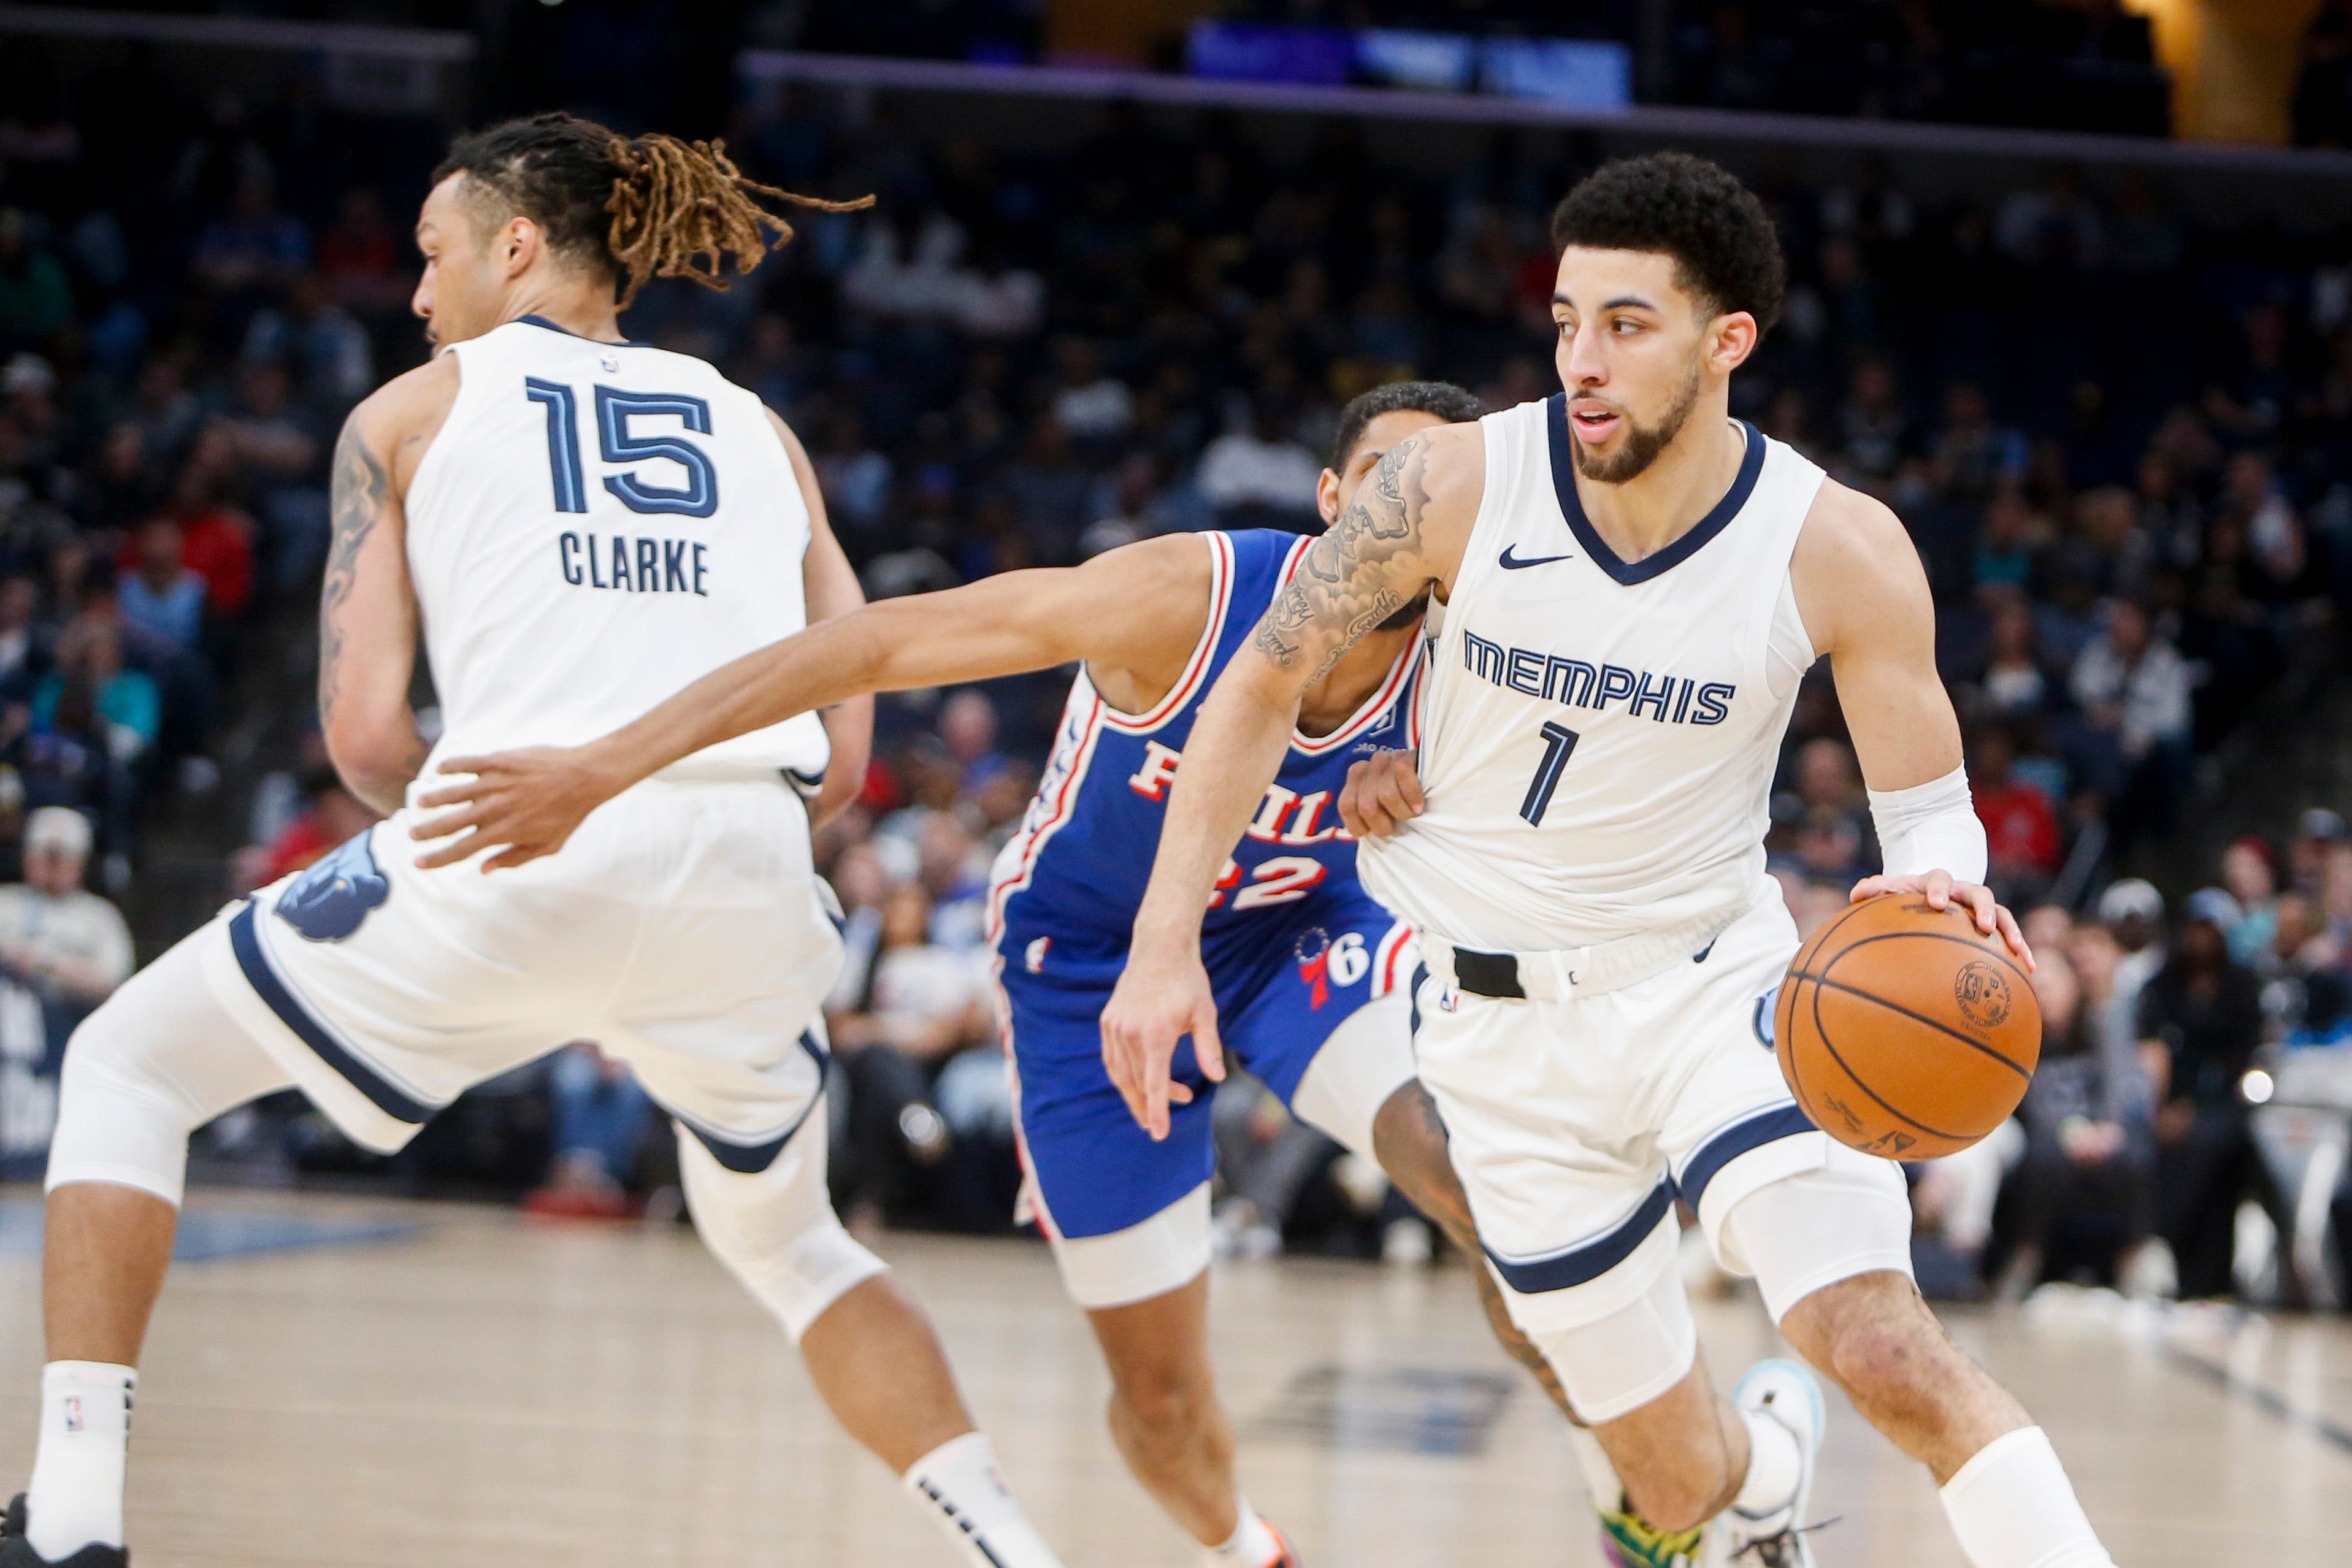 Zach Edey misses another game while Scotty Pippen Jr. leads Memphis Grizzlies to 20-point win